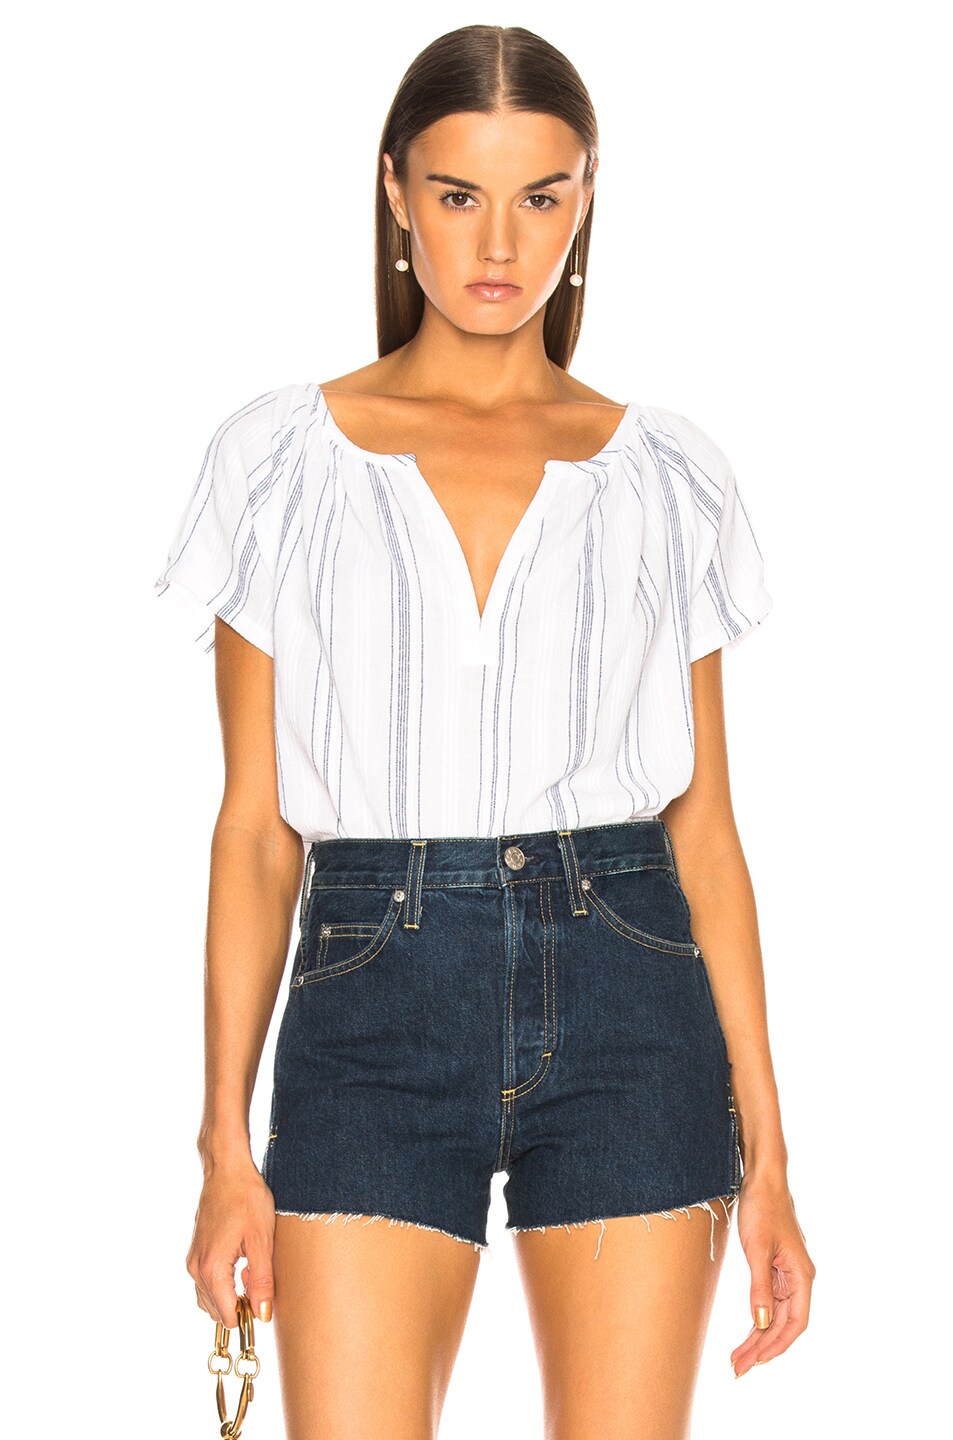 AG Adriano Goldschmied Ariel Blouse in White & Navy | FWRD